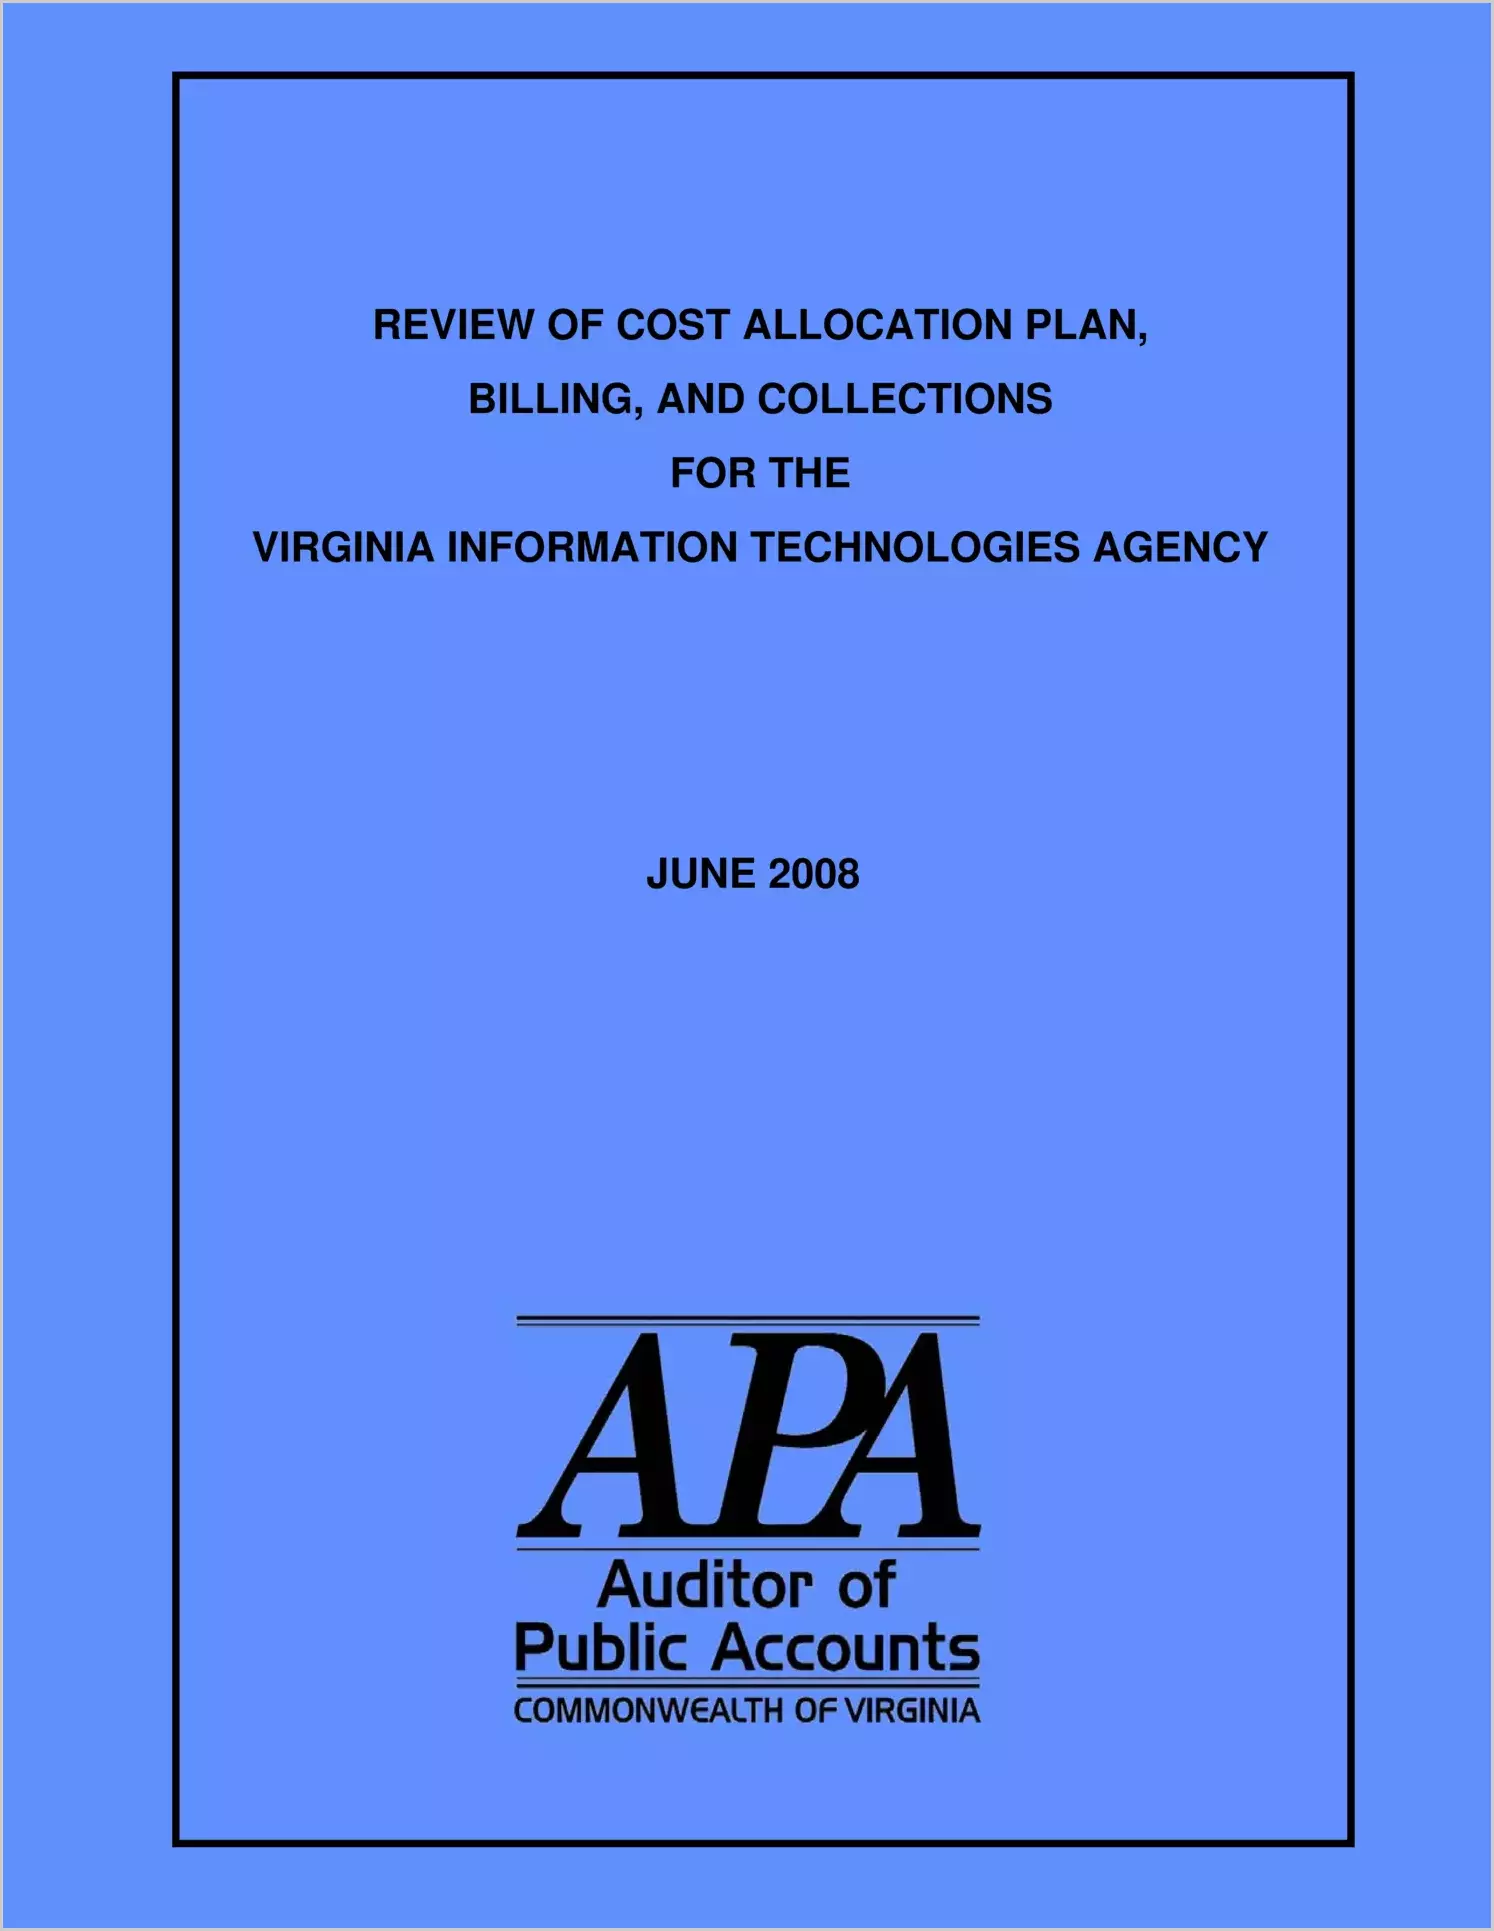 Review of Cost Allocation Plan, Billing, and Collections for the Virginia Information Technologies Agency